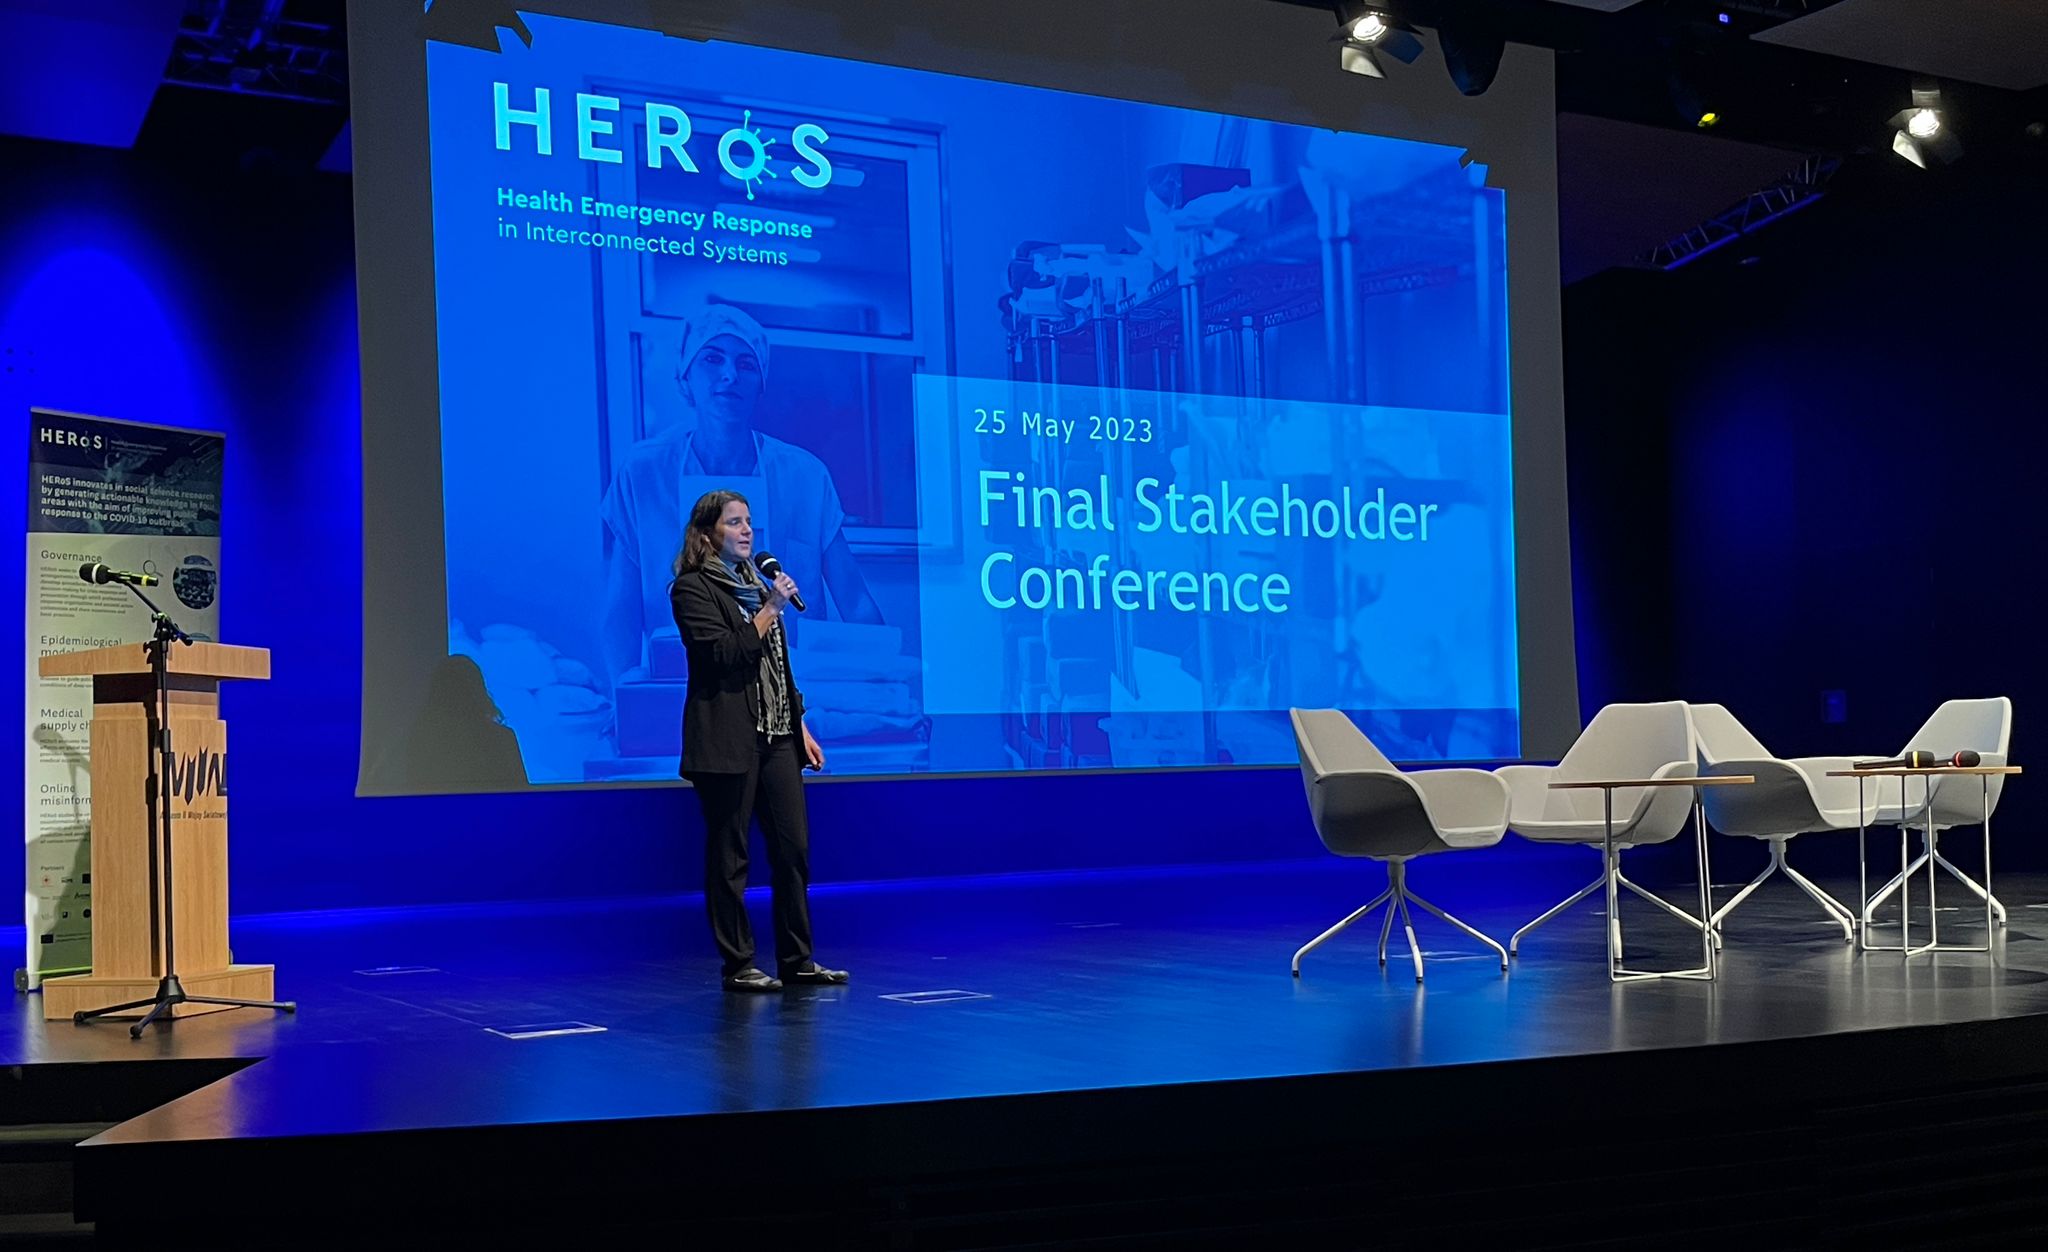 Conferenza finale del Progetto HERoS – Health Emergency Response in interconnected Systems